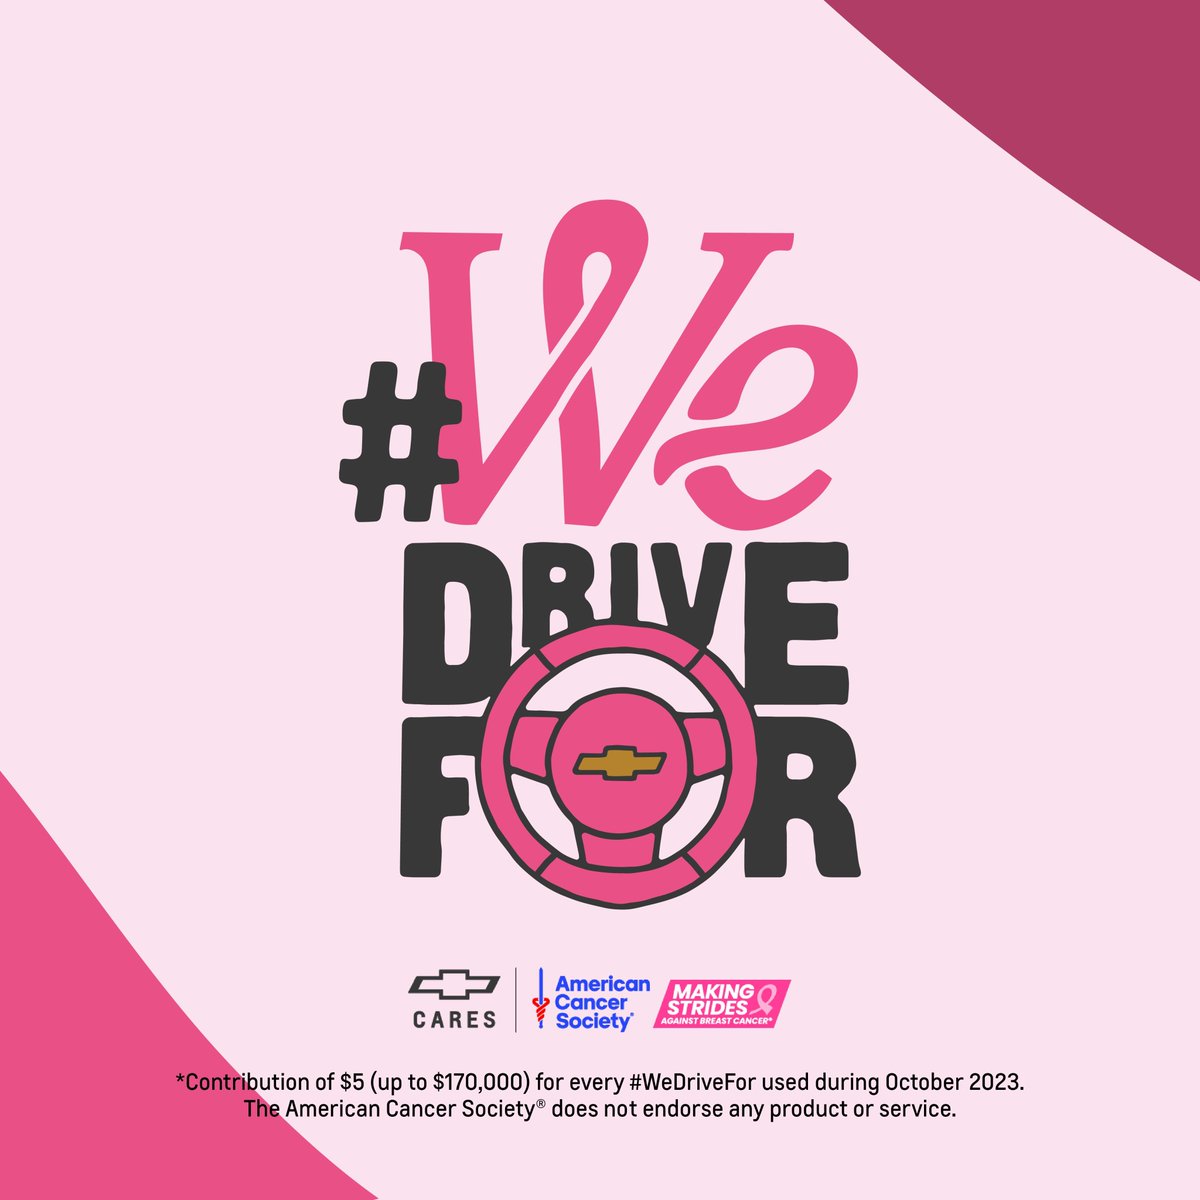 In 2023, an estimated 300,590 women will be diagnosed with invasive breast cancer. Share this post or use the #WeDriveFor to help the @AmericanCancer Society support those patients through research & programs like Reach To Recovery. For each share, #Chevy will donate $5 to ACS!